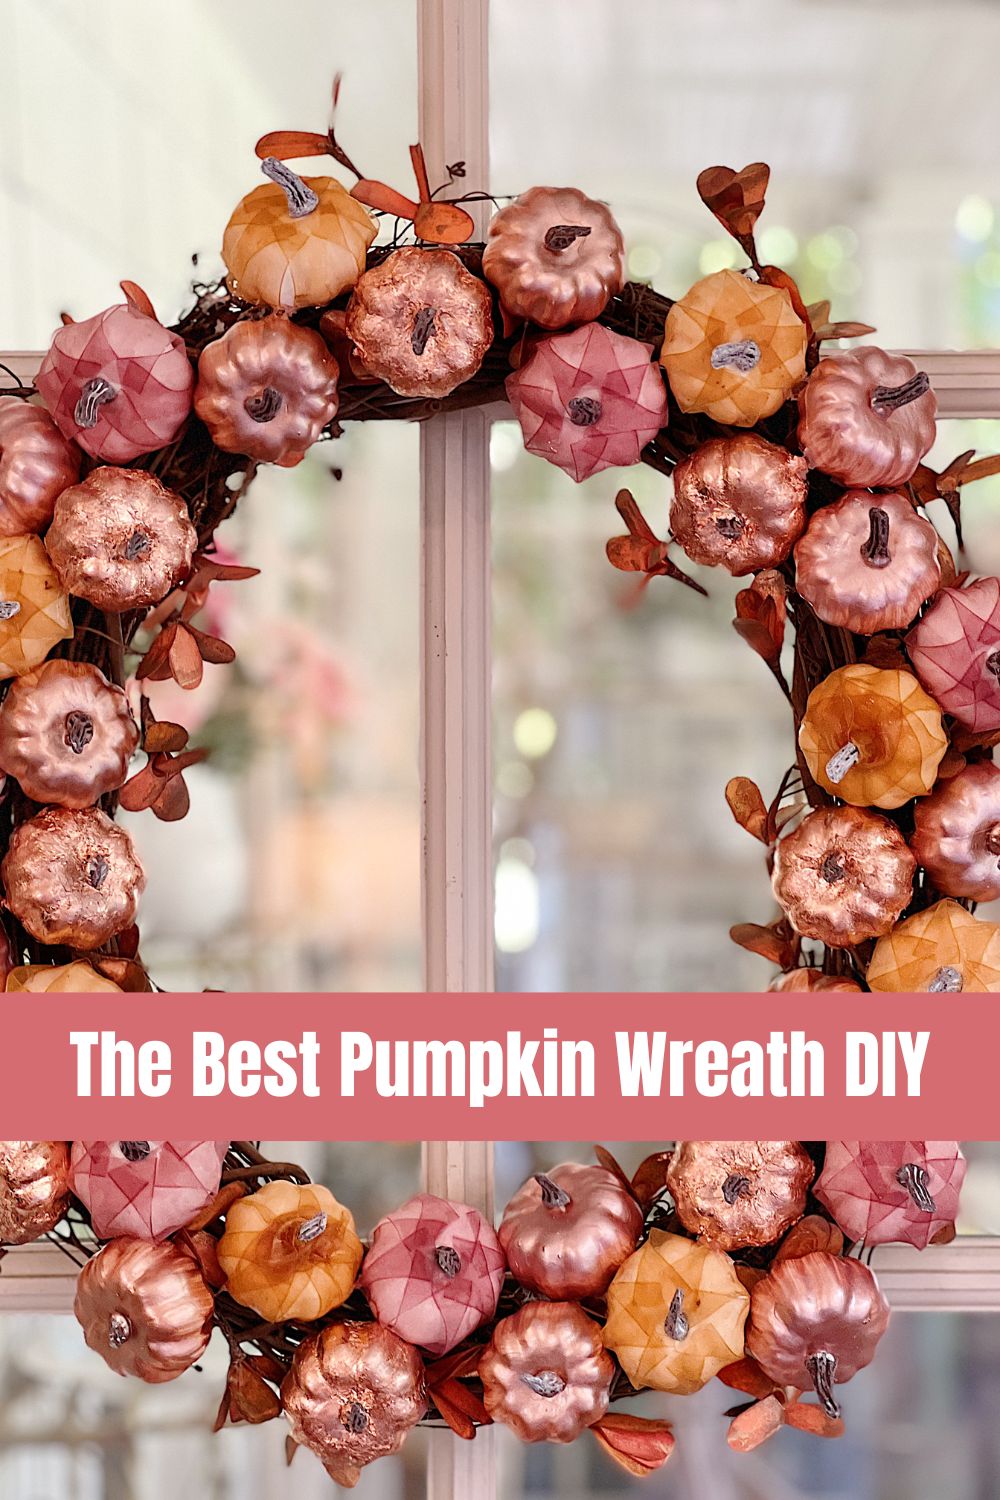 I love making wreaths for fall and thought it would be fun to make a pumpkin wreath. I used my two favorite colors, copper and pink!